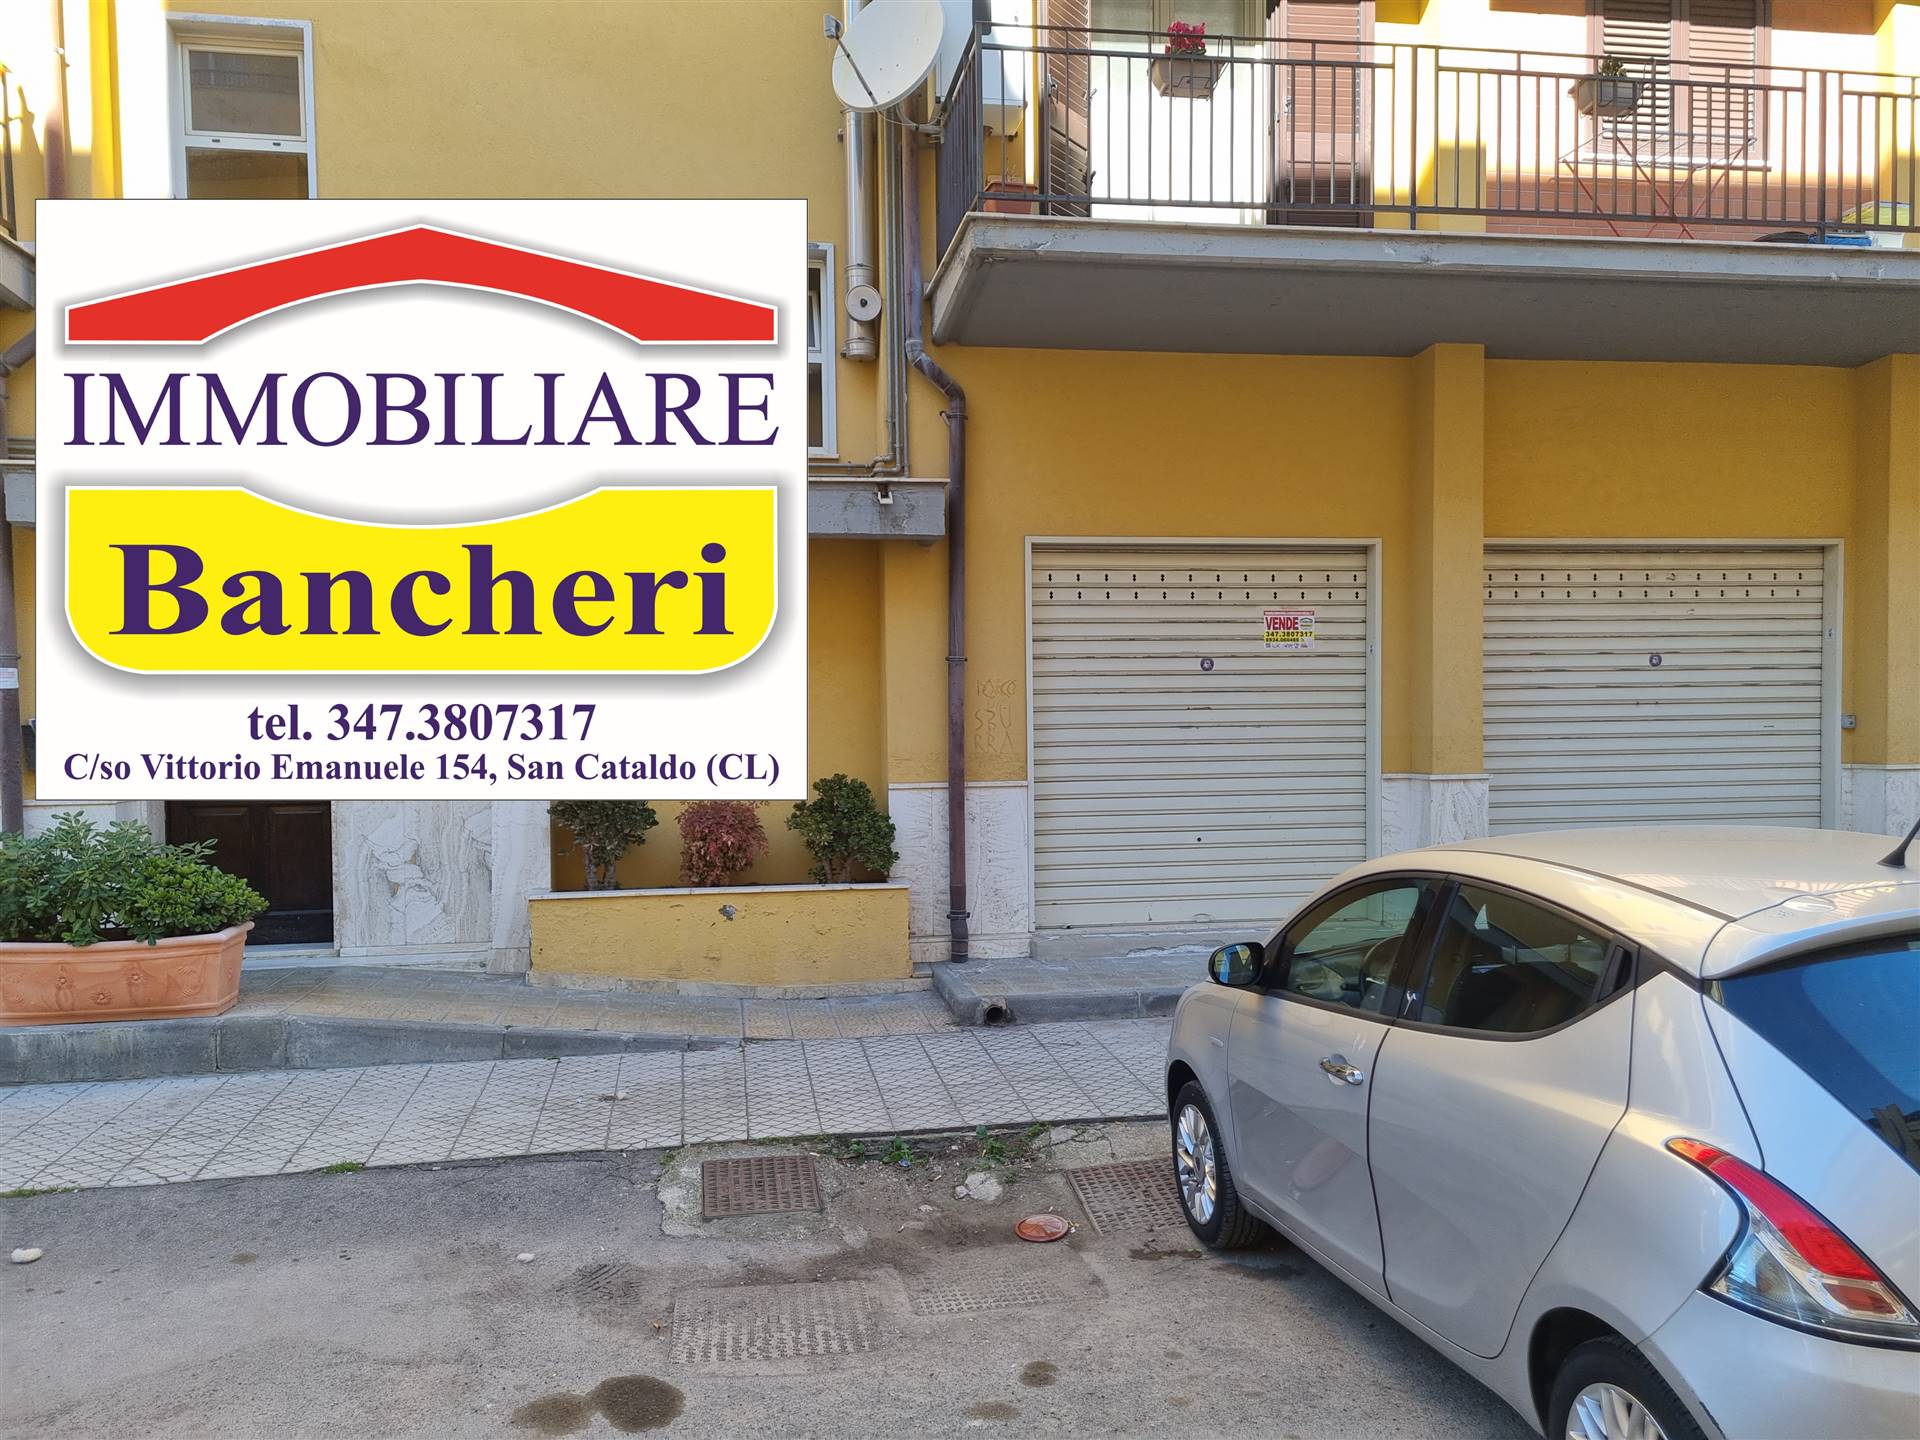 Locale commerciale a CALTANISSETTA